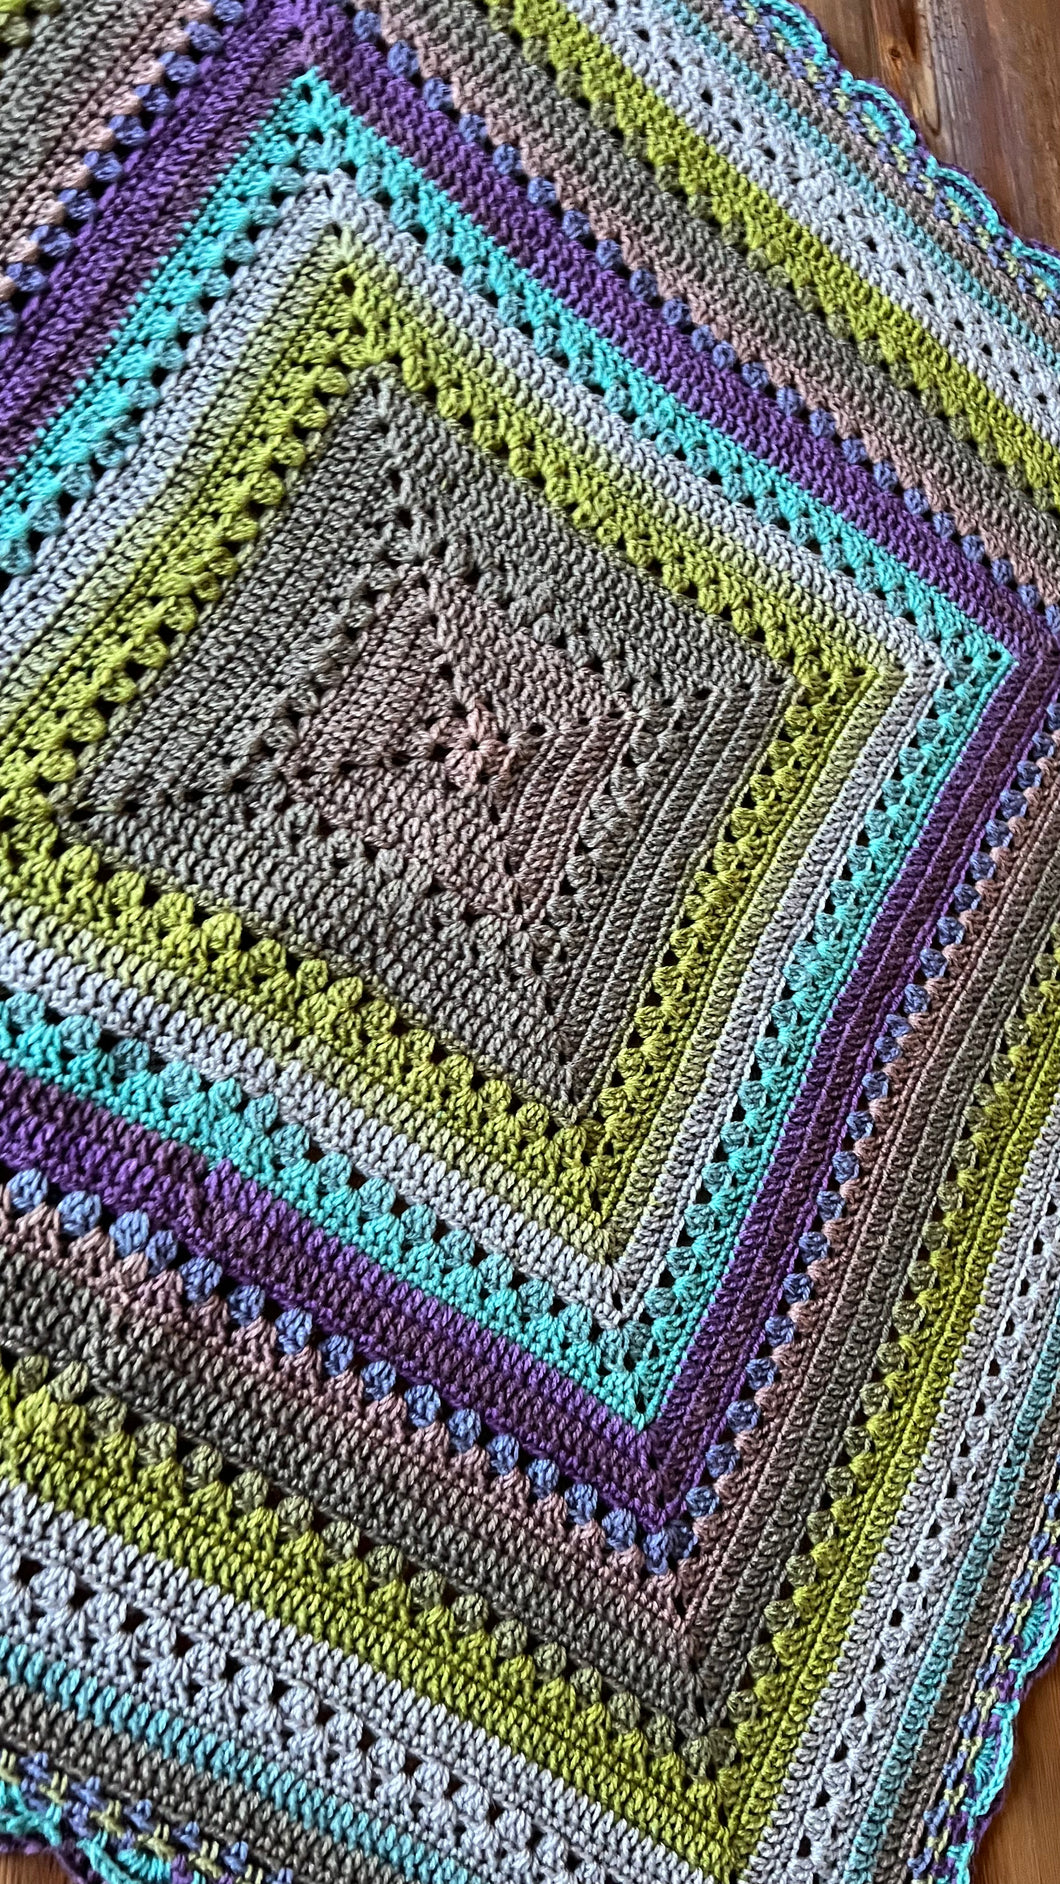 Granny Square Blanket Crochet 6 Week Course